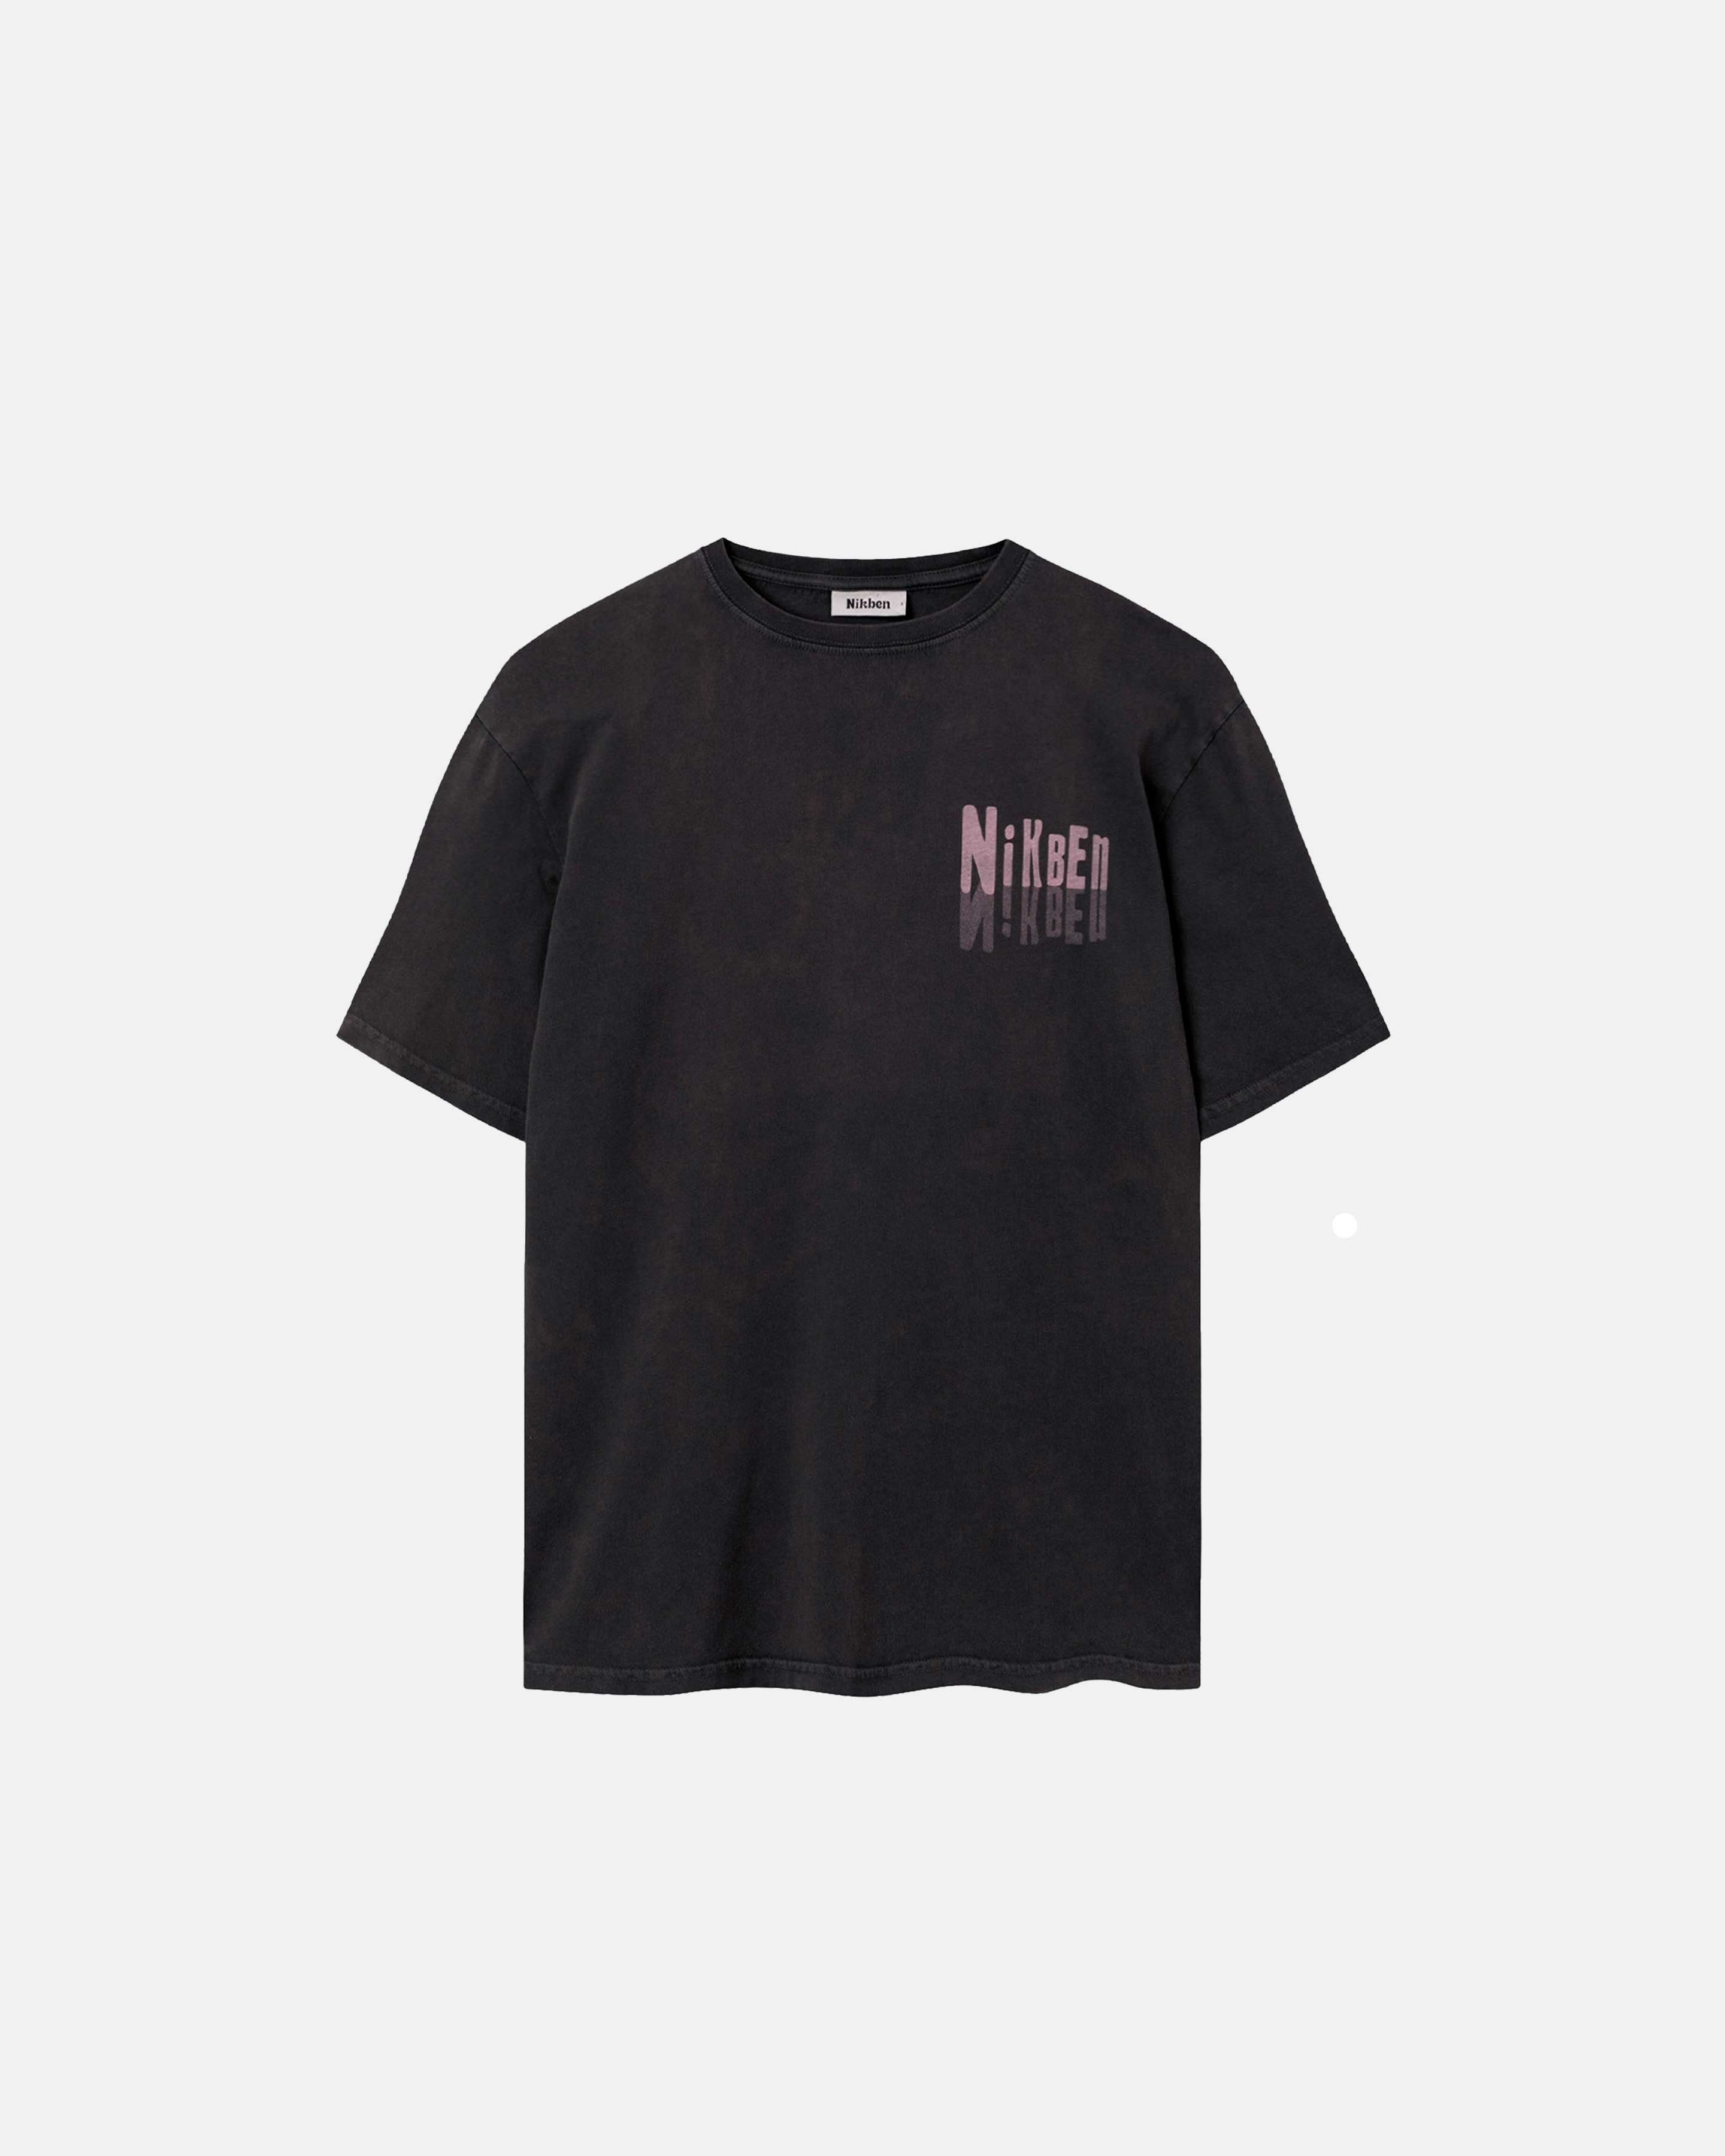 Washed black t-shirt with a pink "Nikben" logo on the chest.